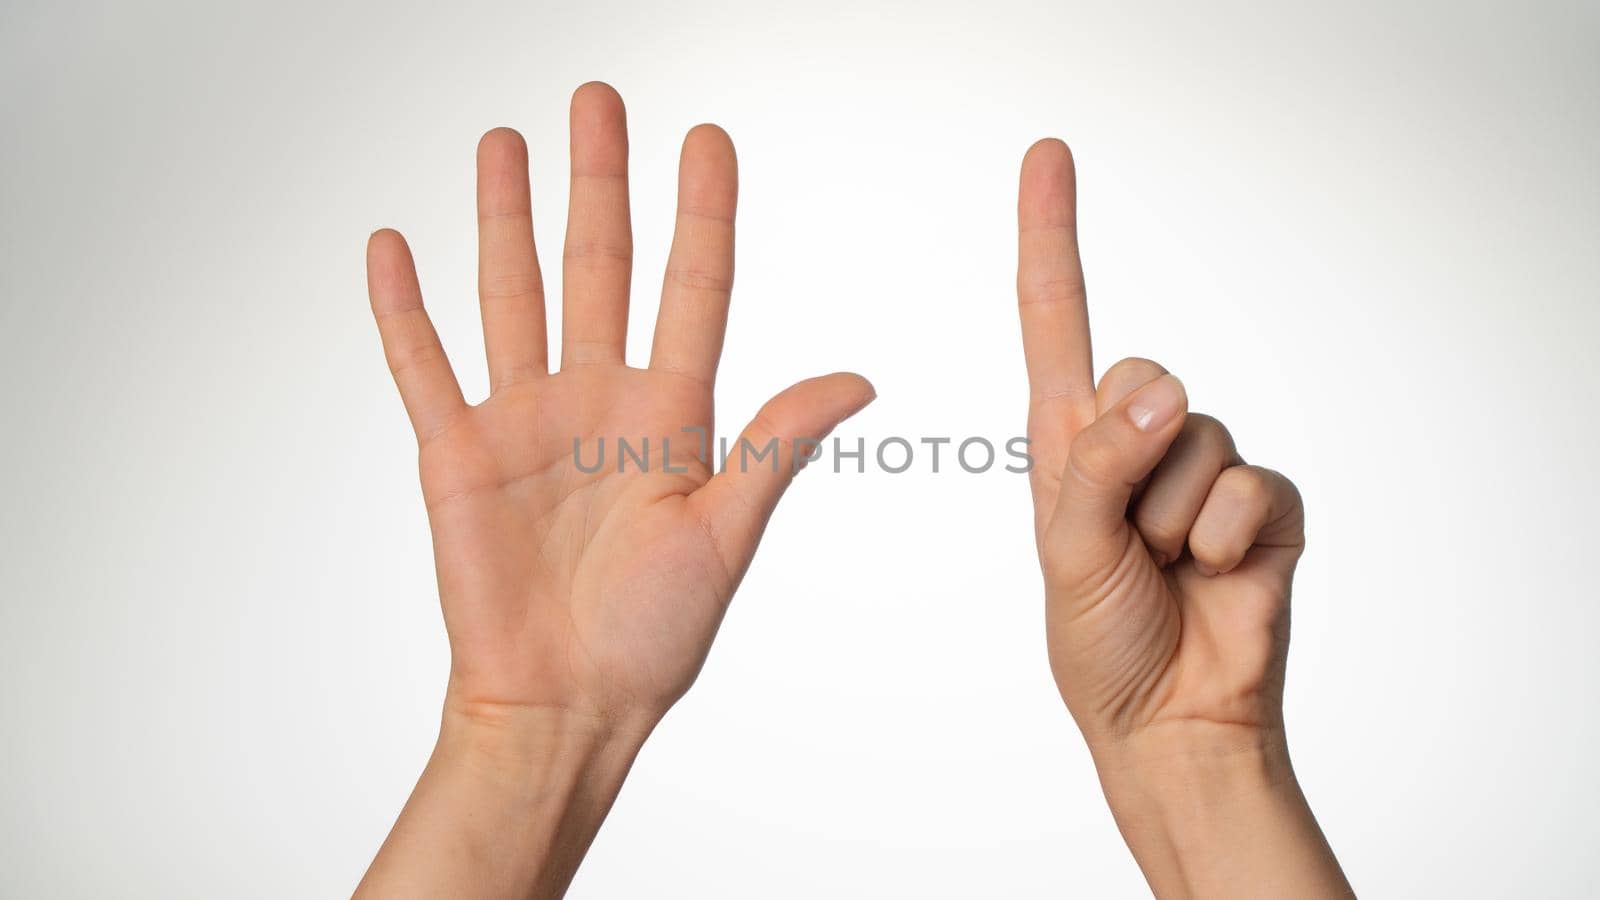 Women's hands gesture counting on fingers 6 palm side. High quality photo